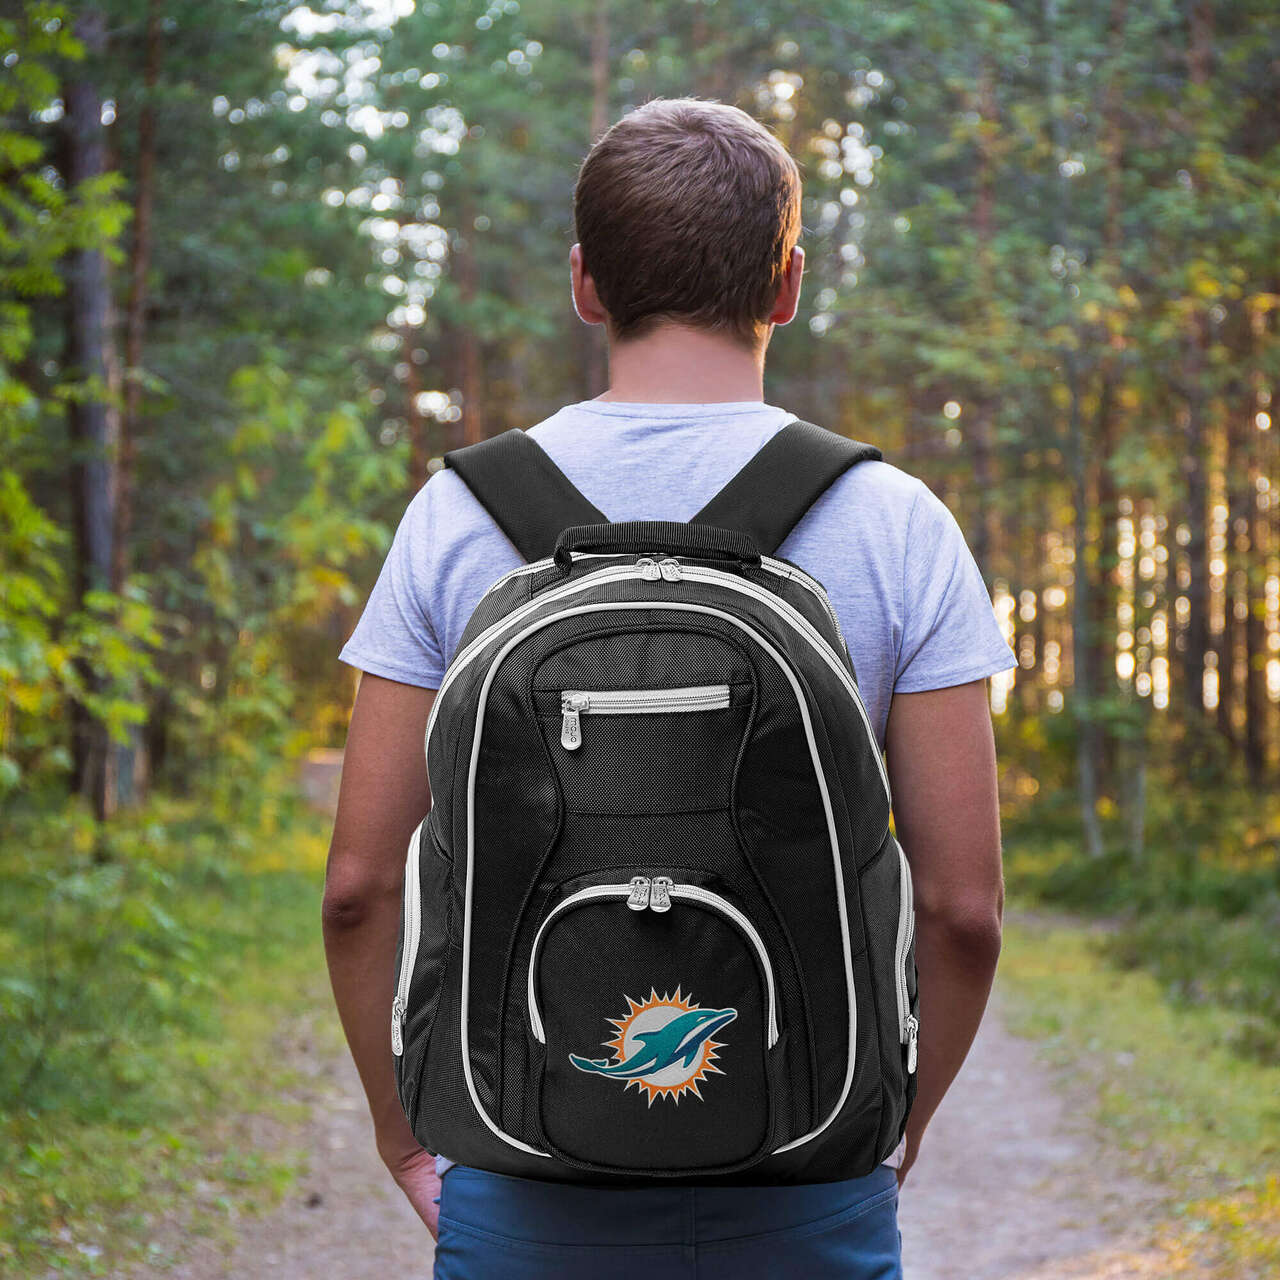 Miami Dolphins Backpack | Miami Dolphins Laptop Backpack